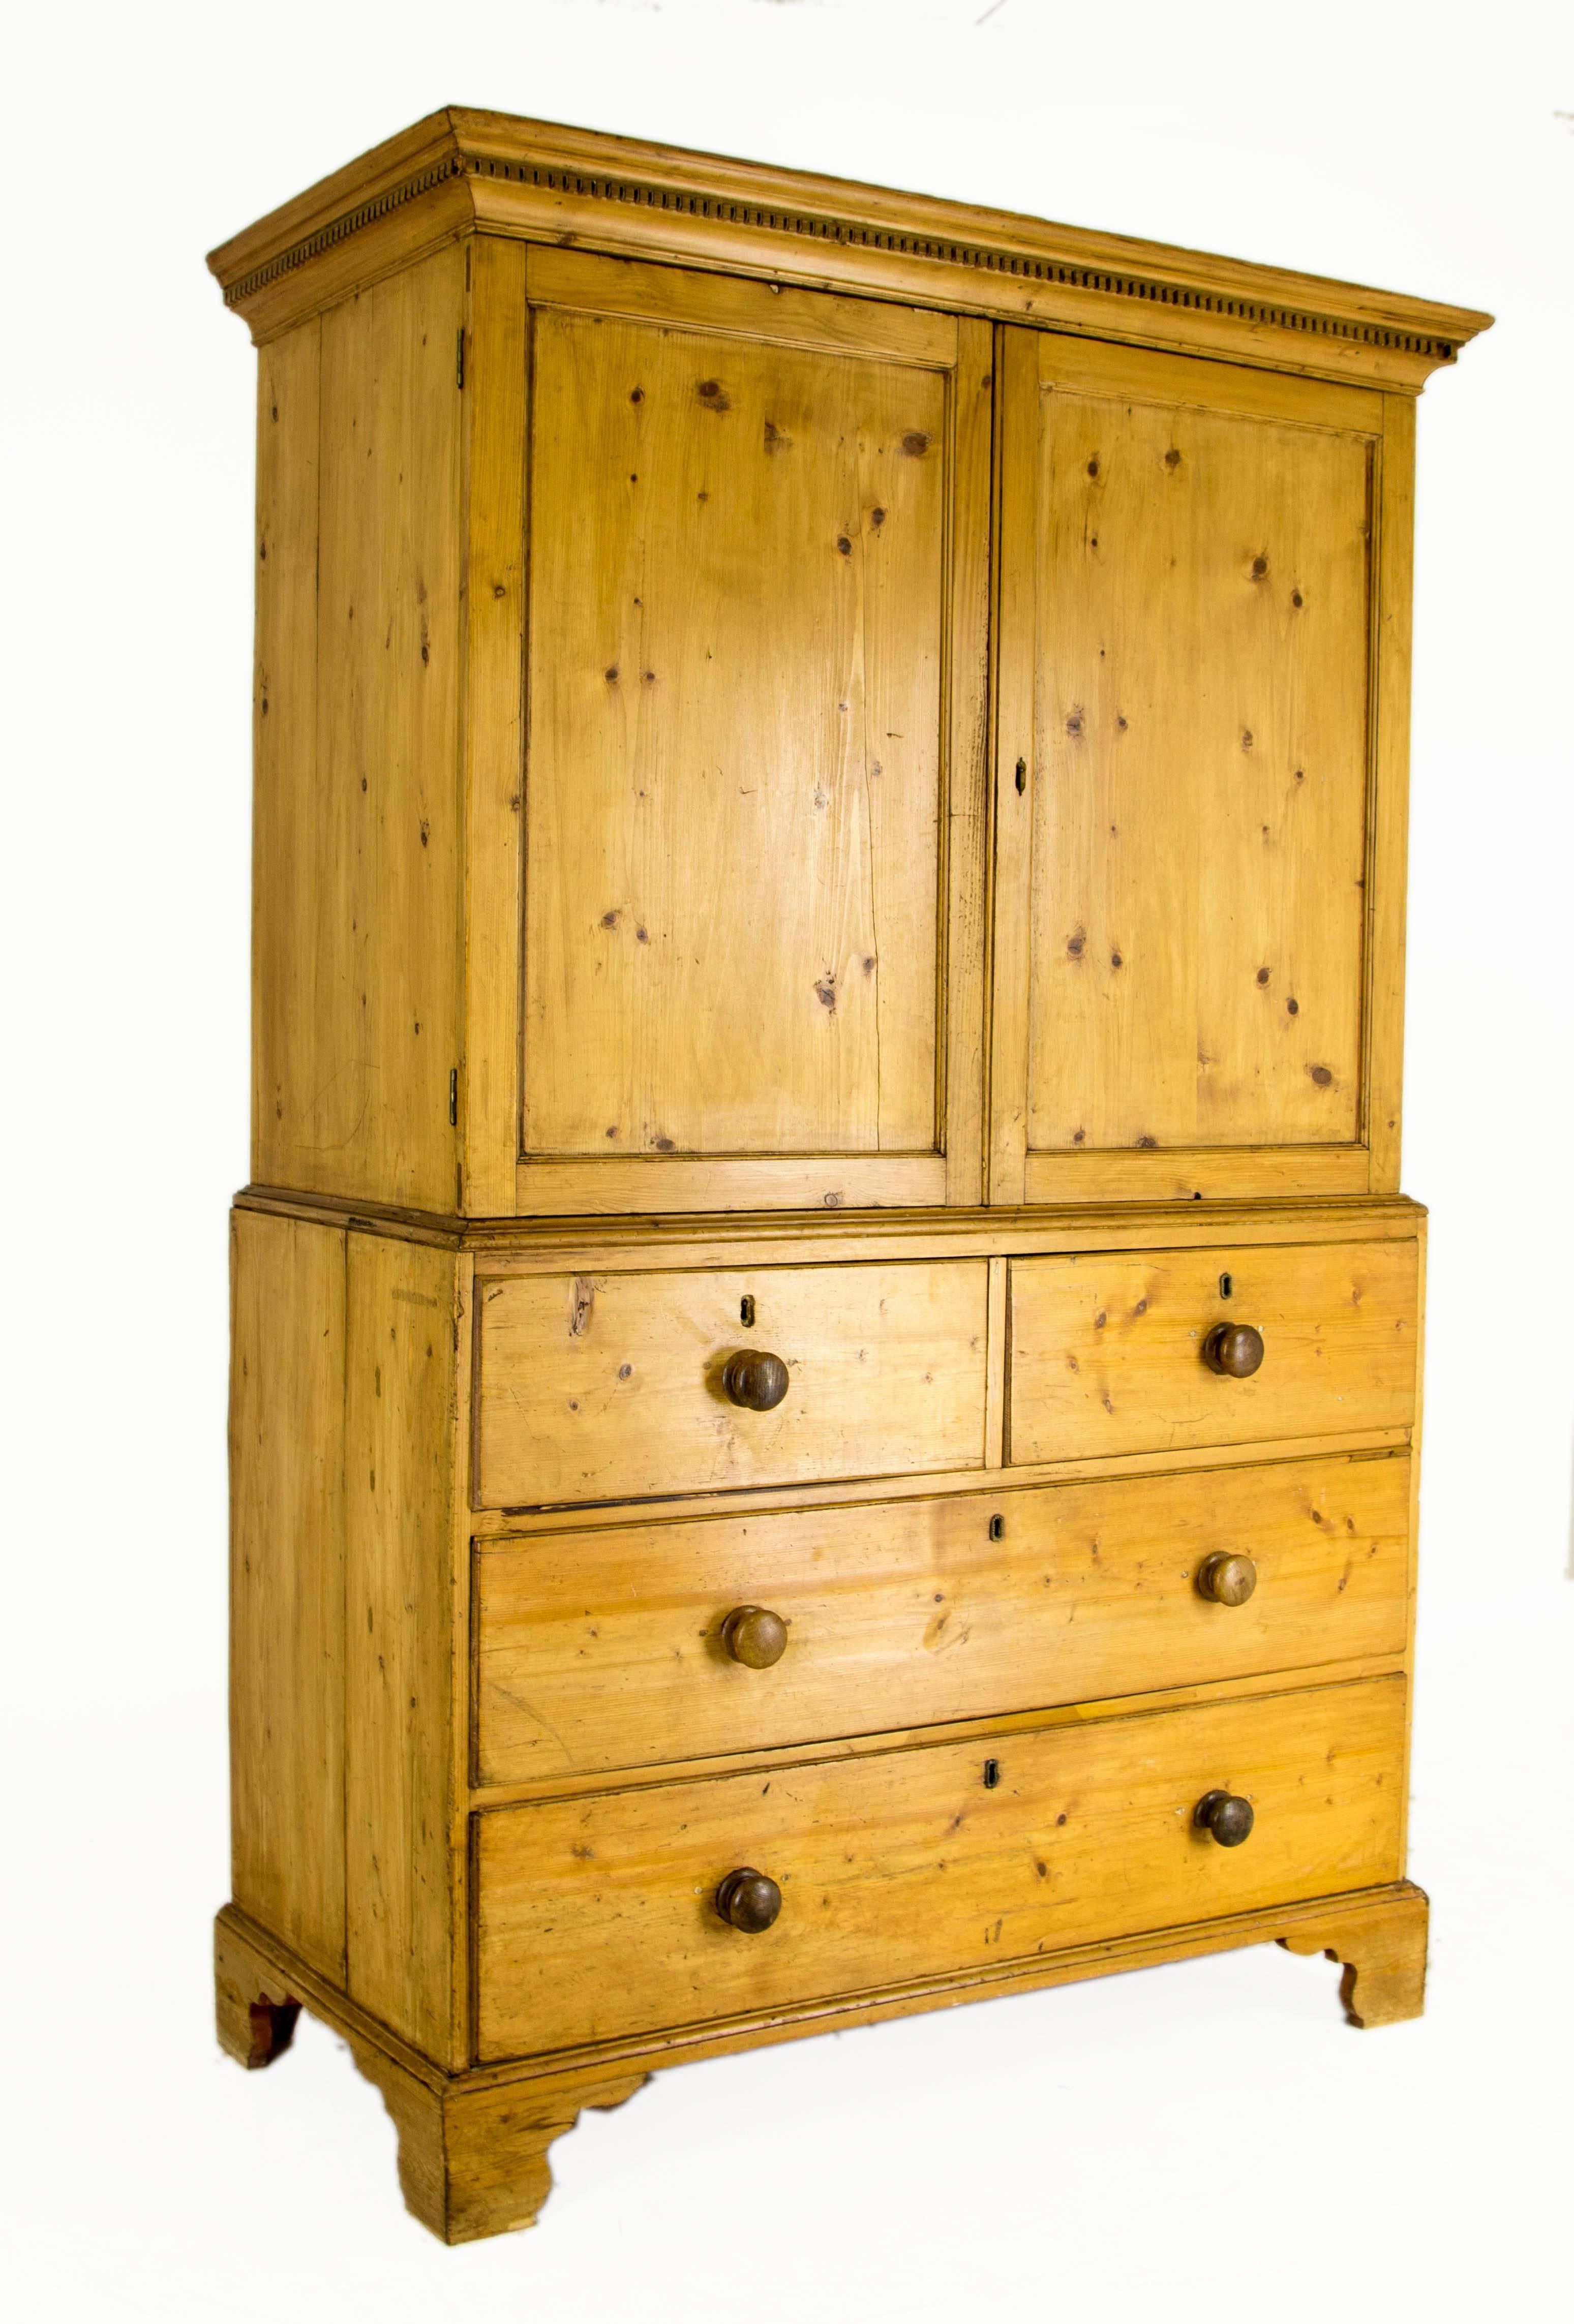 Scotland, 1870
Solid pine construction
Dentil cornice above
Two large panel doors open to reveal four interior slide out drawers
The chest of drawers below has two short over two long drawers
Ending on bracket legs
Separates into two